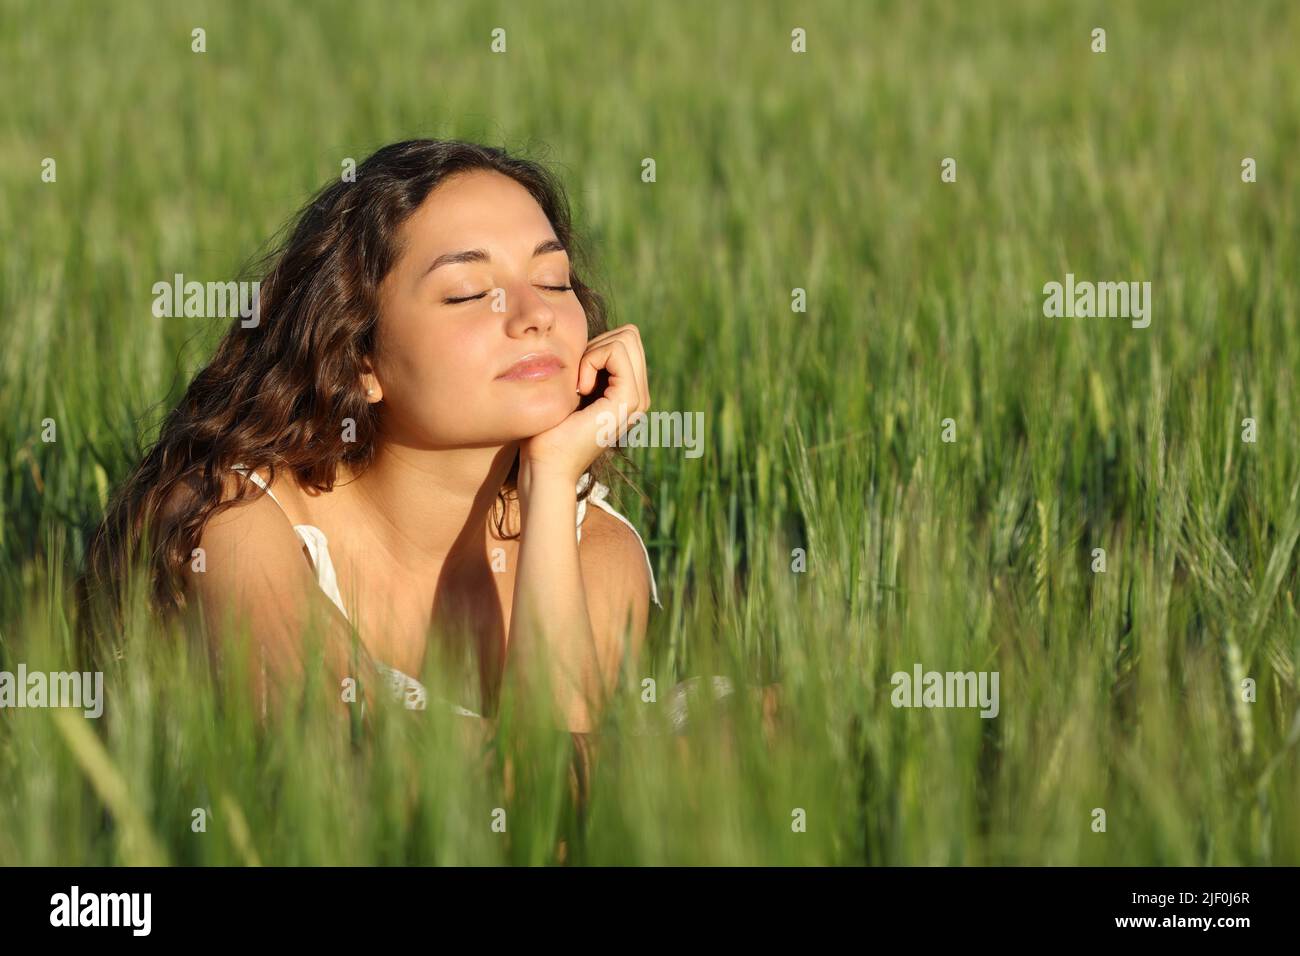 Woman breathing fresh air and relaxing in a green wheat field Stock Photo